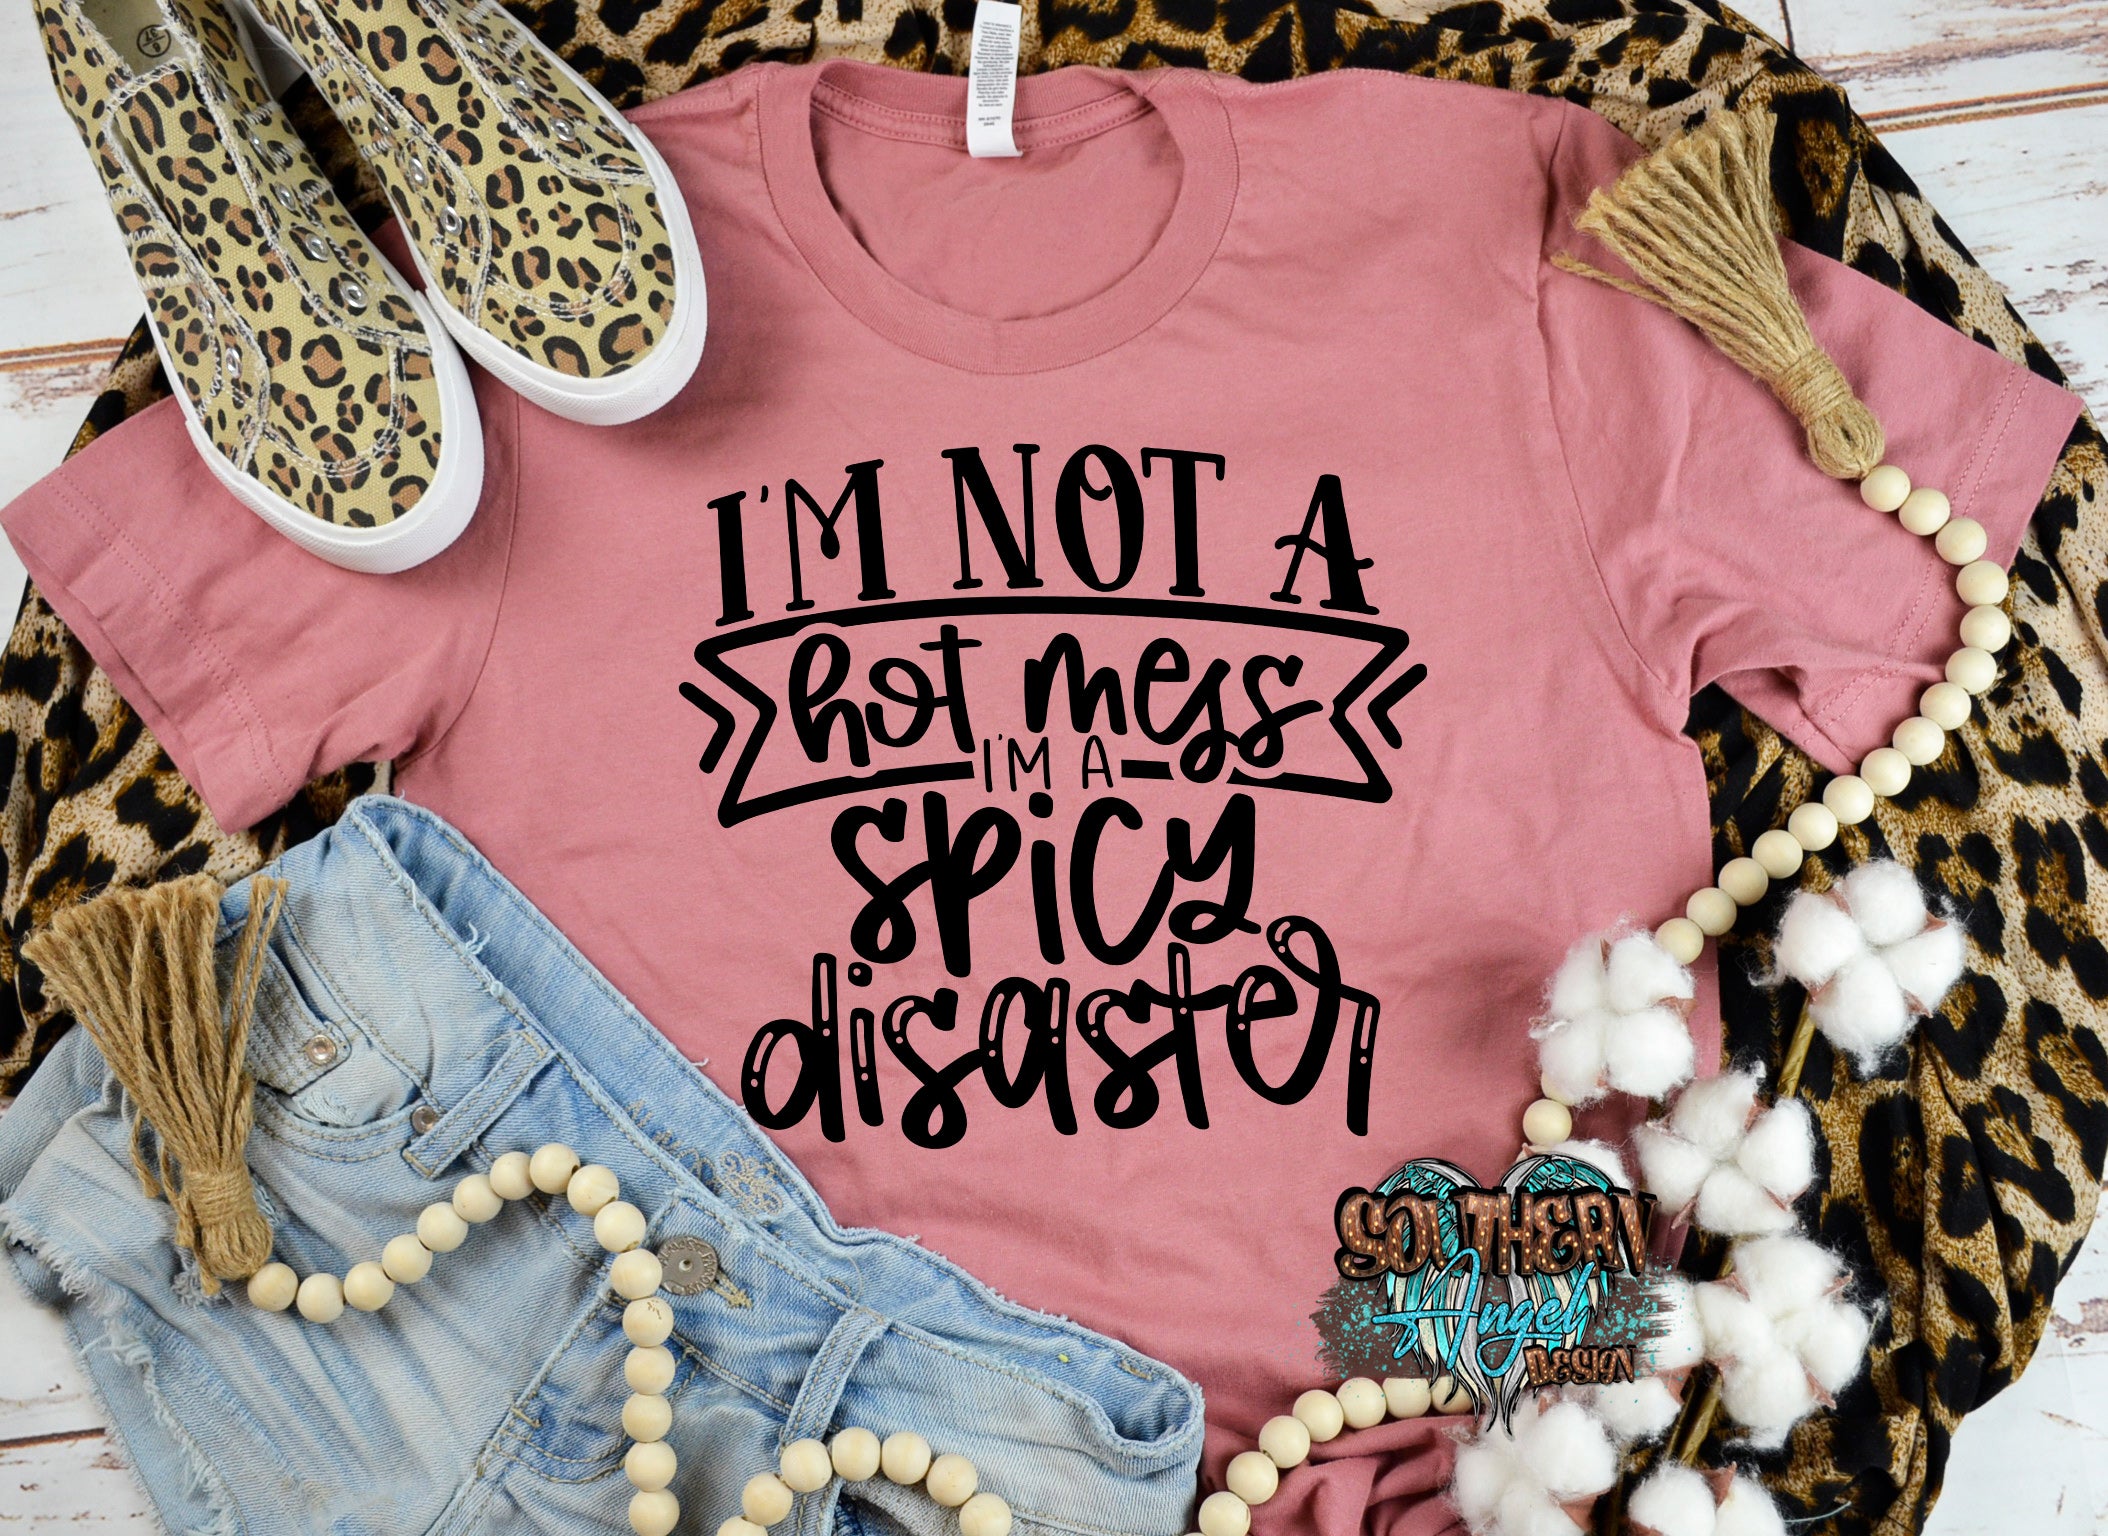 Rosy Brown I’m Not A Hot Mess I’m A Spicy Disaster image_4477012d-217e-48de-a06e-f574e110b3bb.jpg i-m-not-a-hot-mess-i-m-a-spicy-disaster Mom & Dad